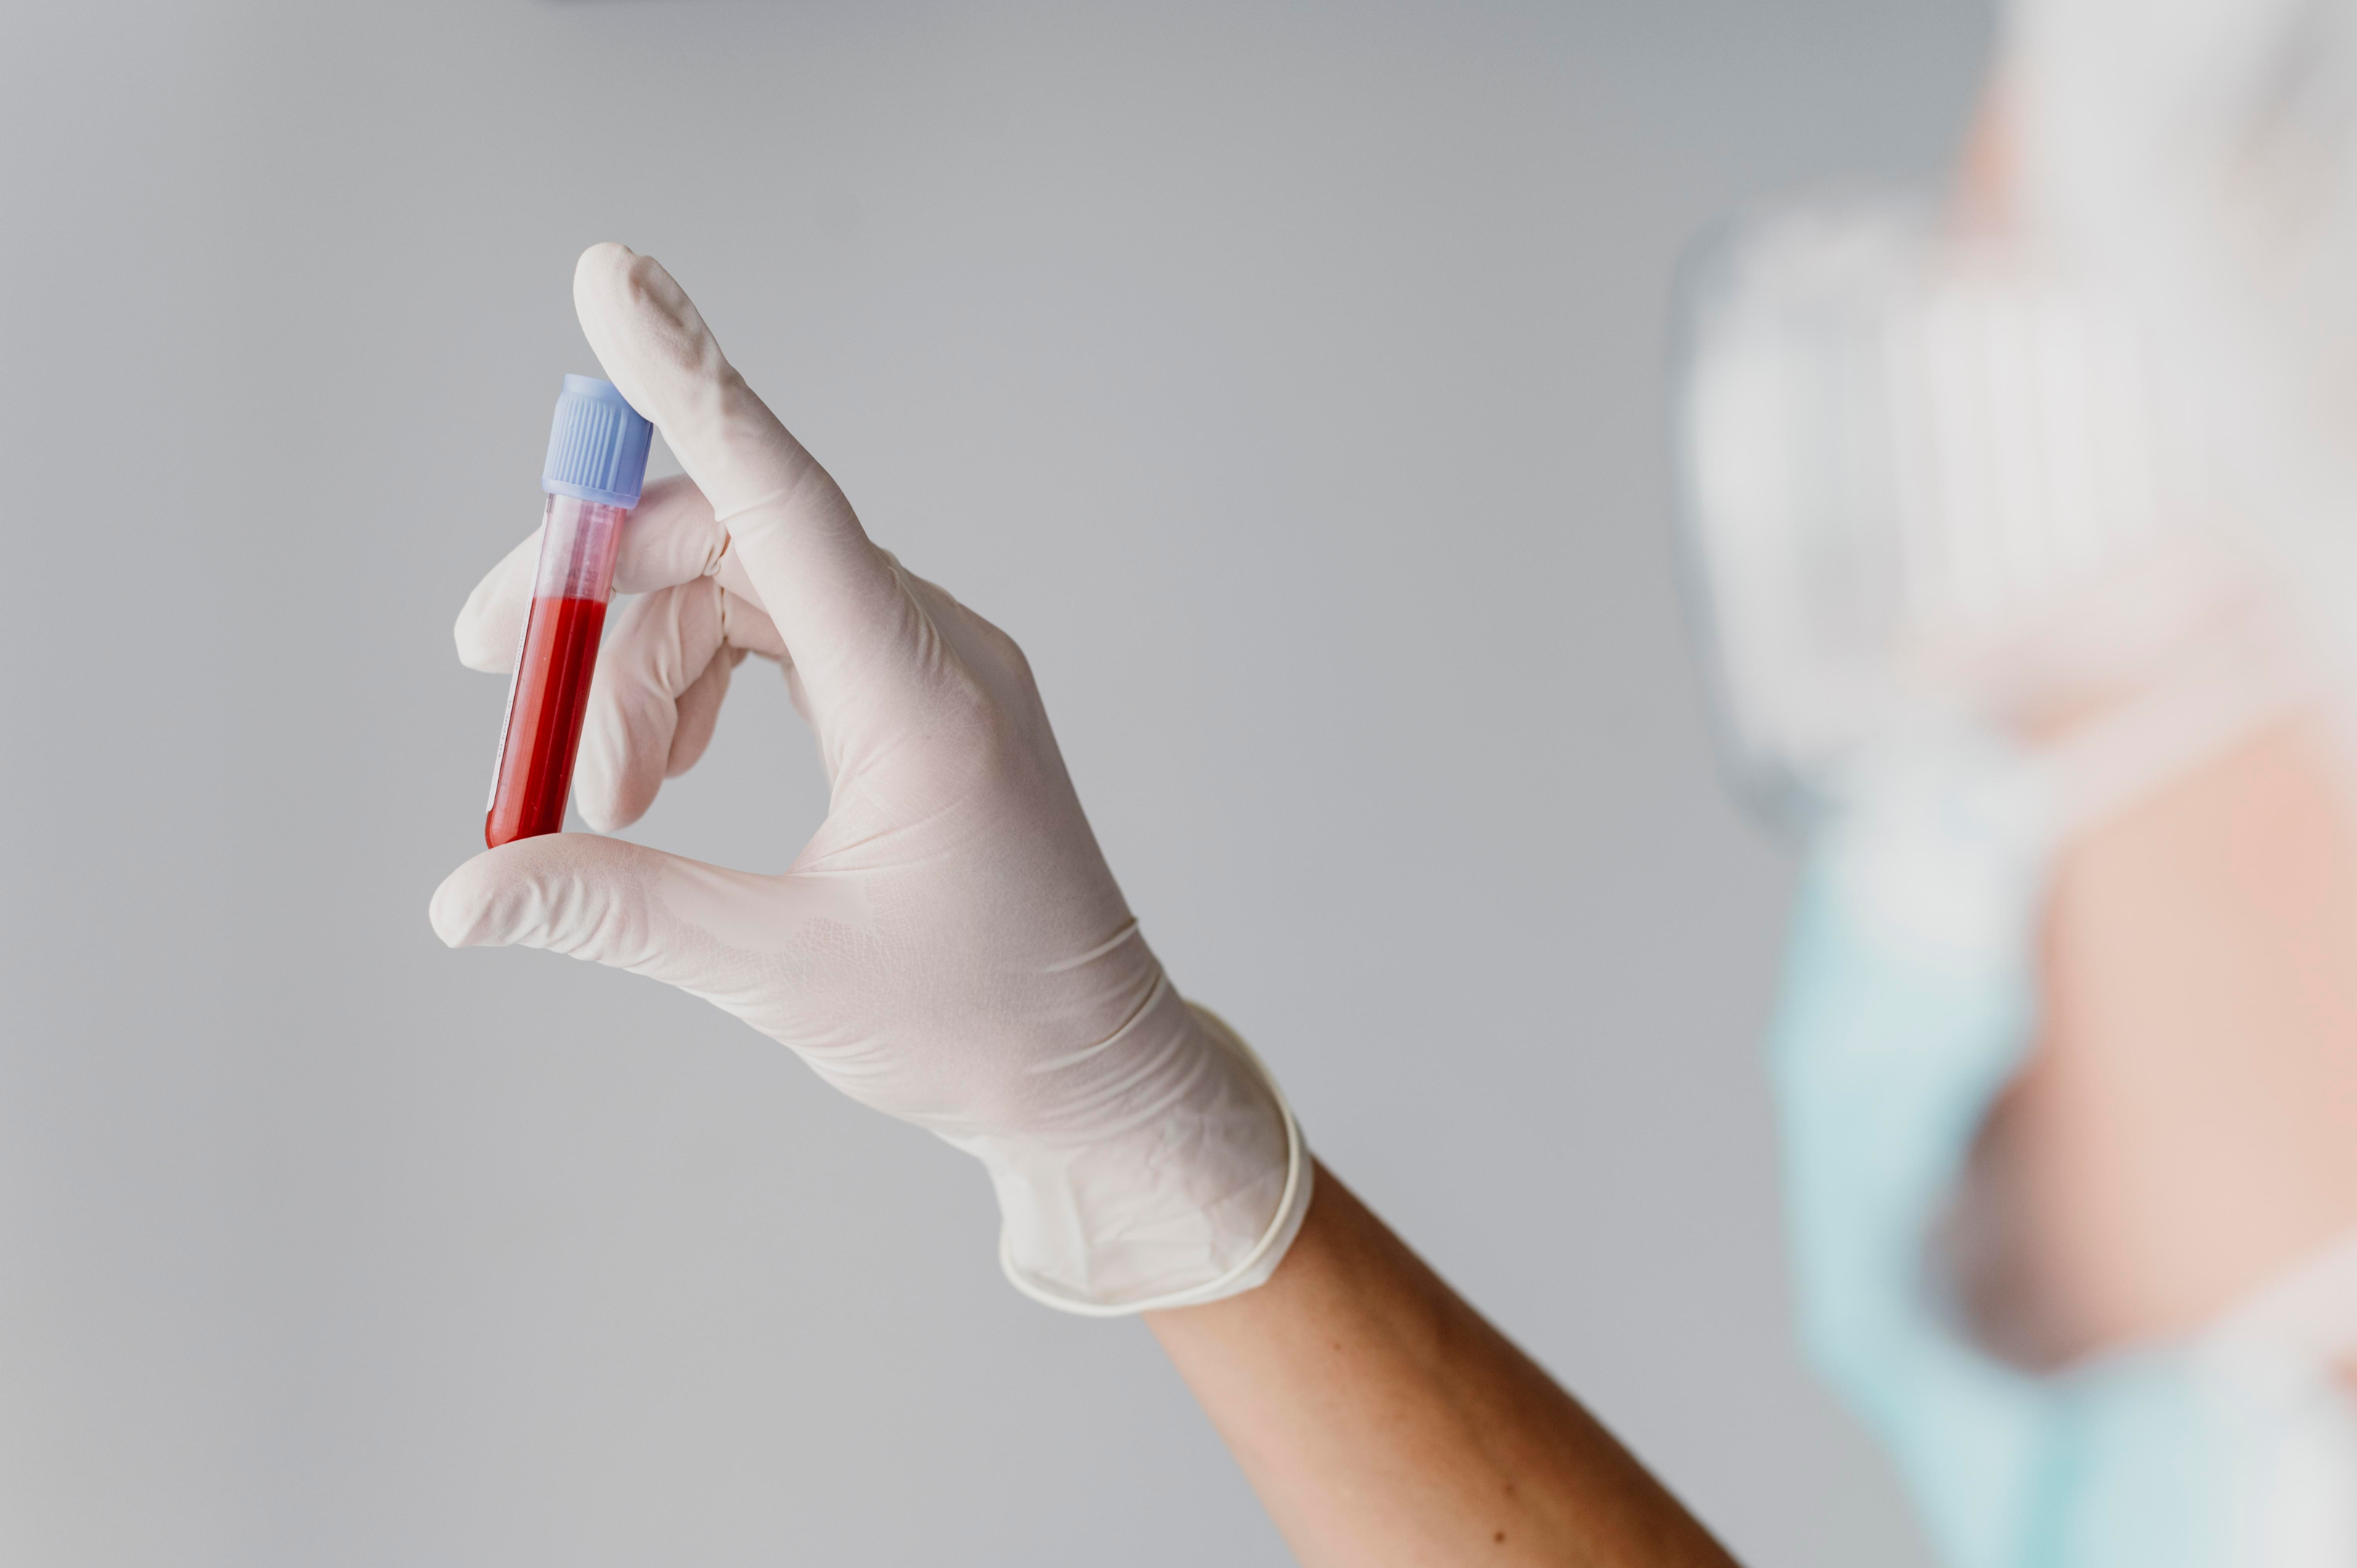 Most of the diagnostic tests use a blood sample.